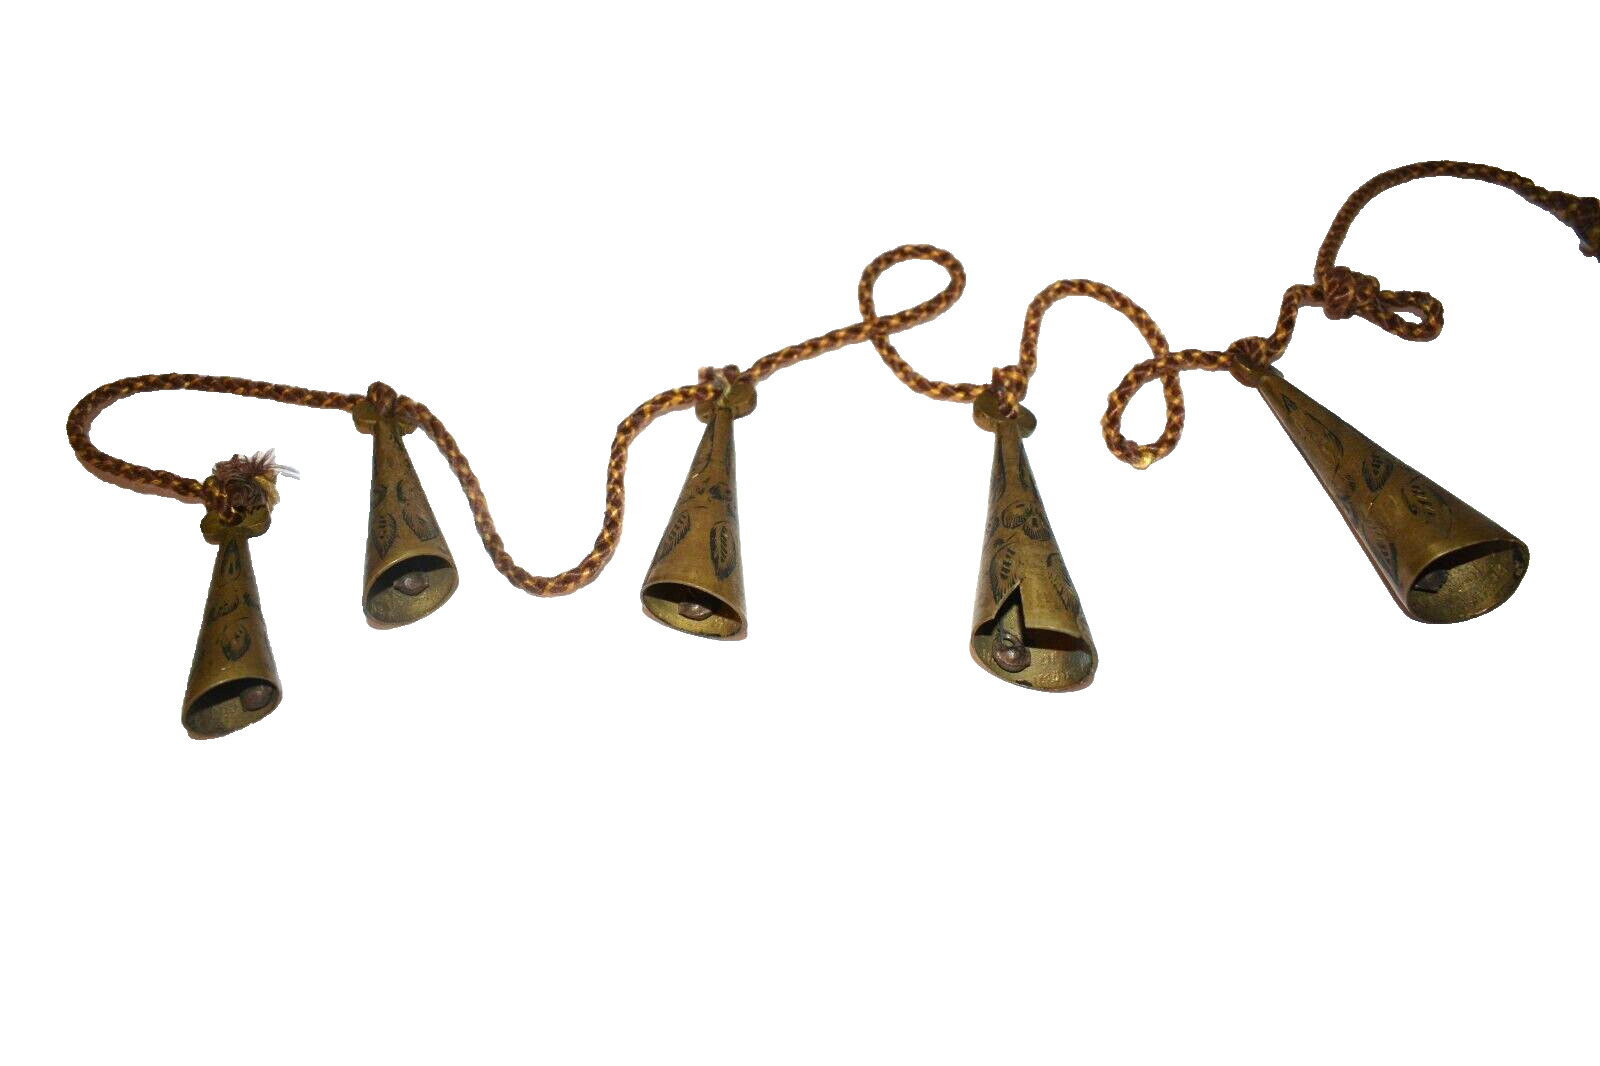 Antique 5 Etched Brass Bells Sarna India Cone Shape on Braided Cord Wind Chimes